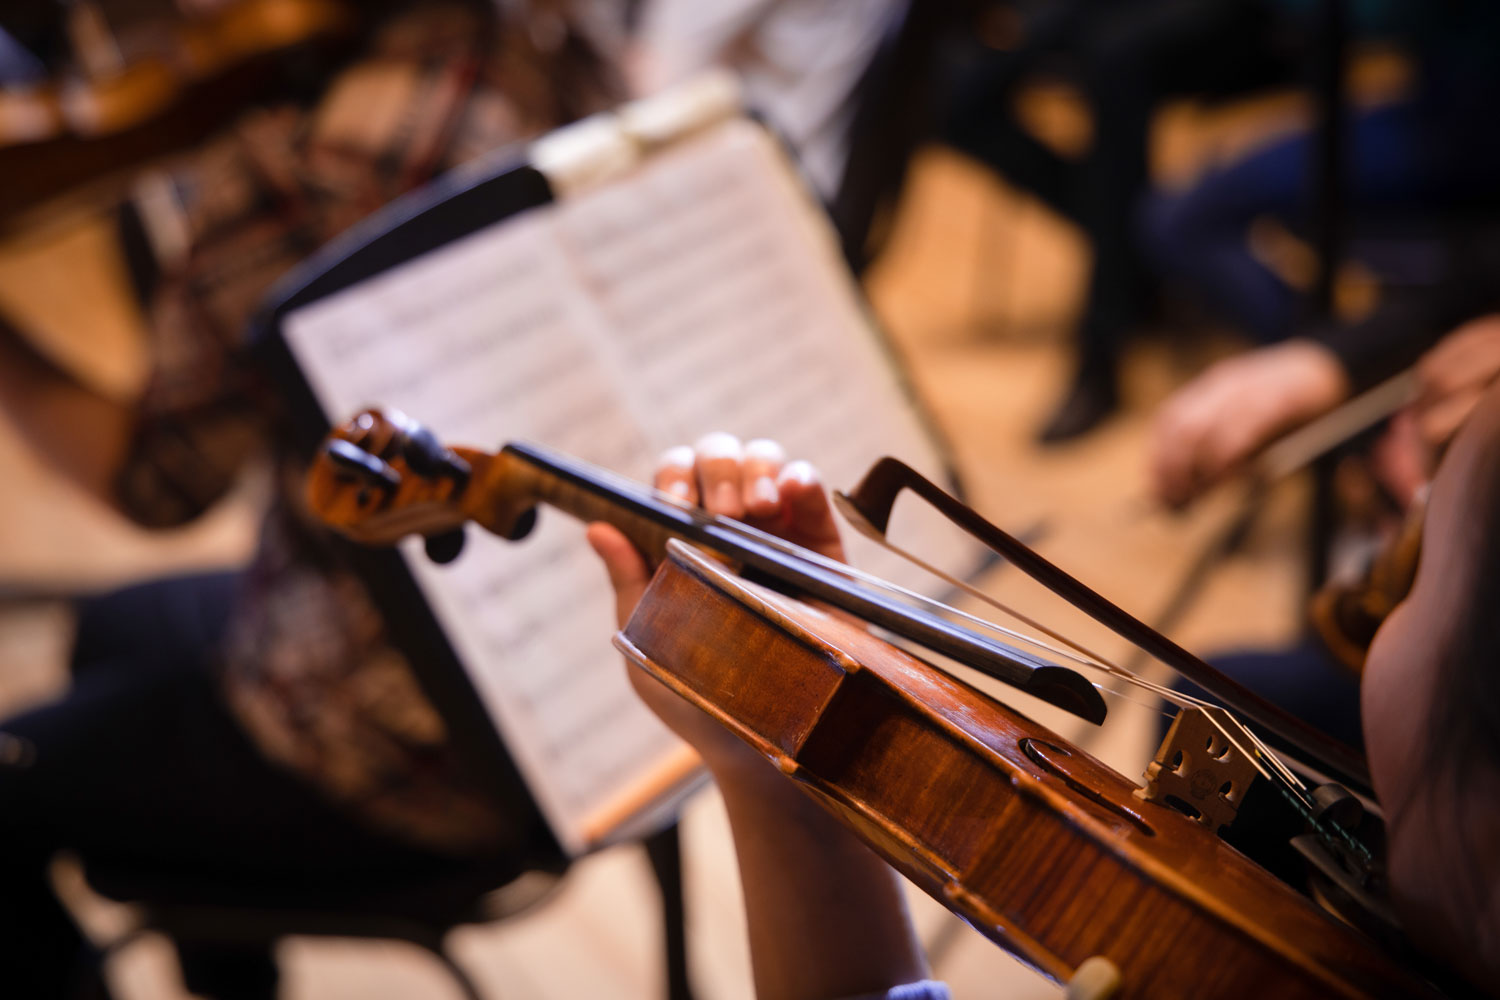 musician-playing-violin-reading-music-sheet-during-classical-music-concert-close-up-web